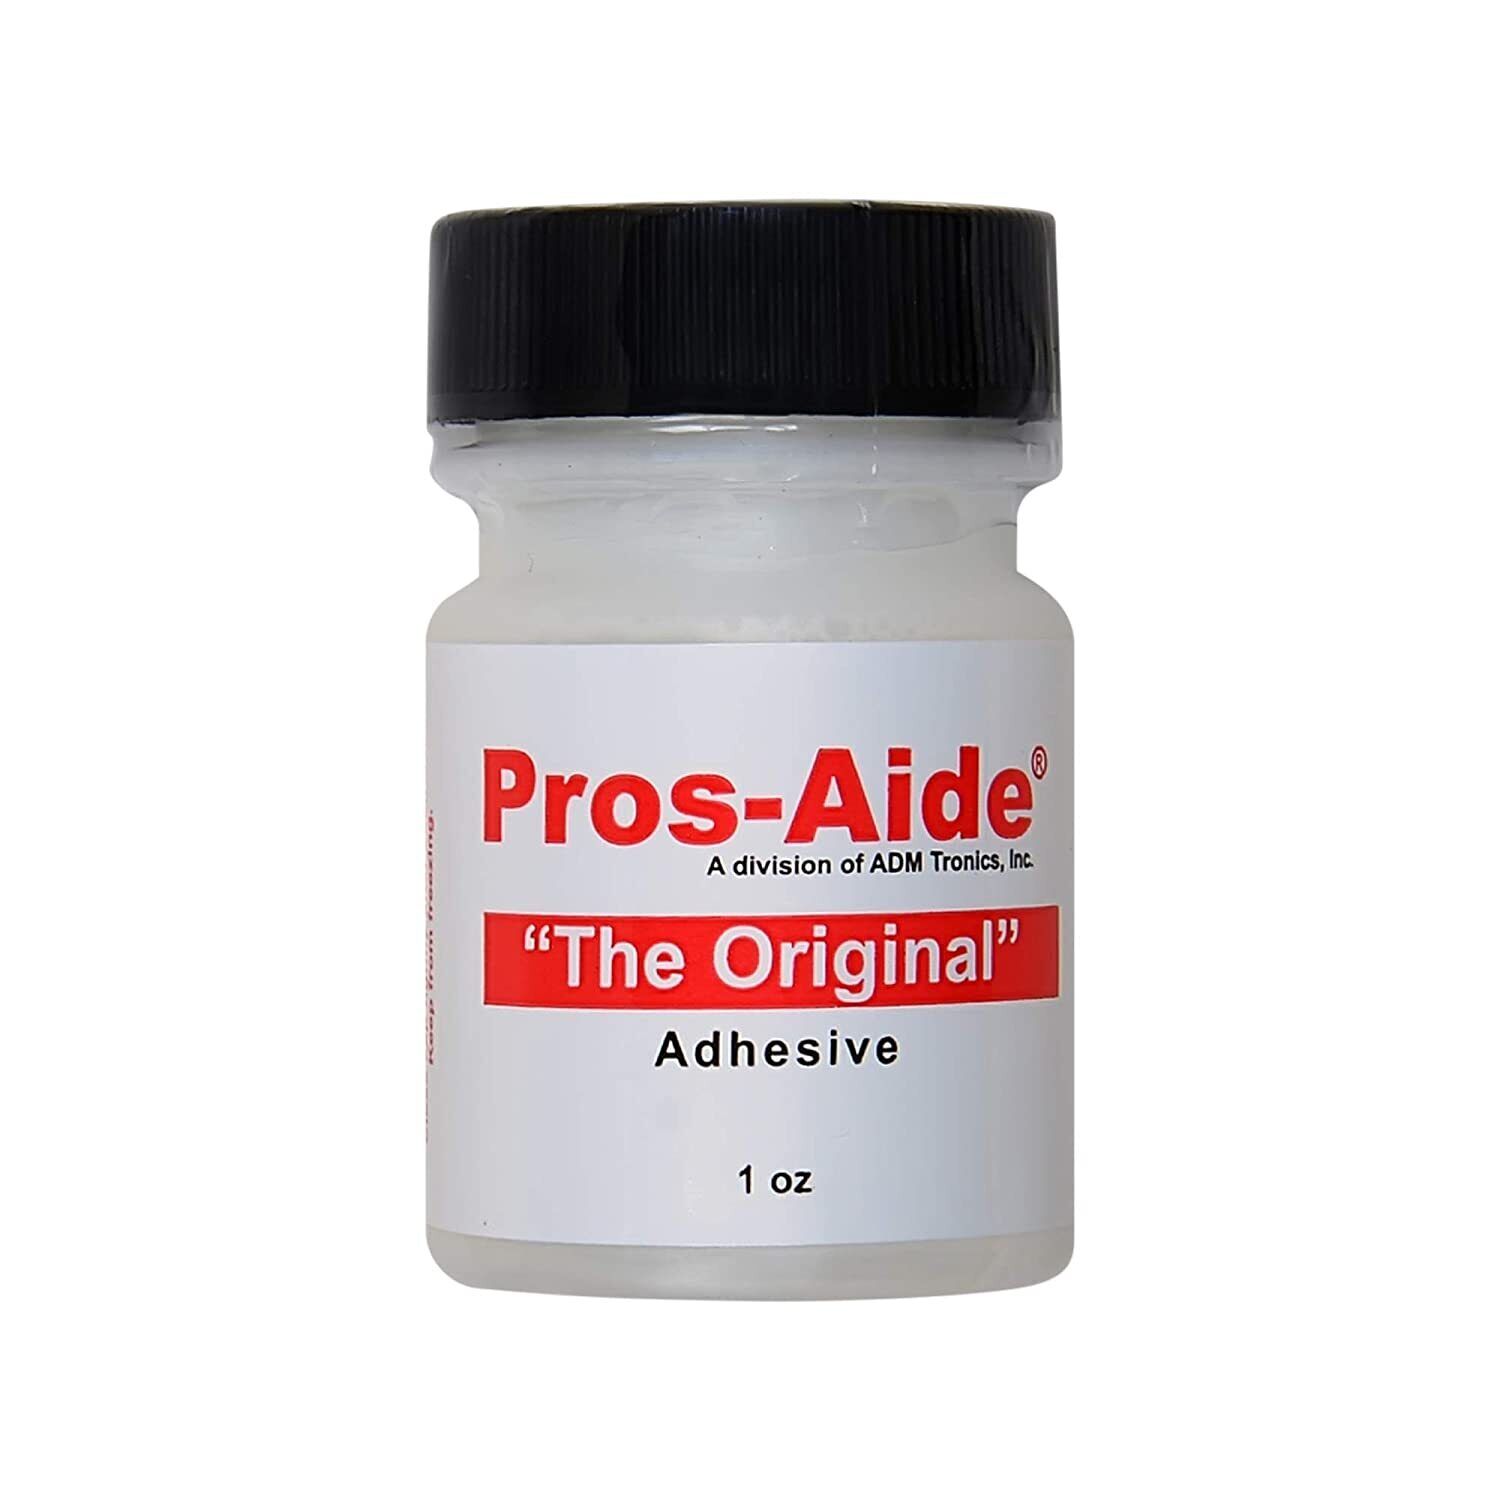 Pros-Aide The Original Adhesive 1 oz. By ADM - Professional Medical Grade